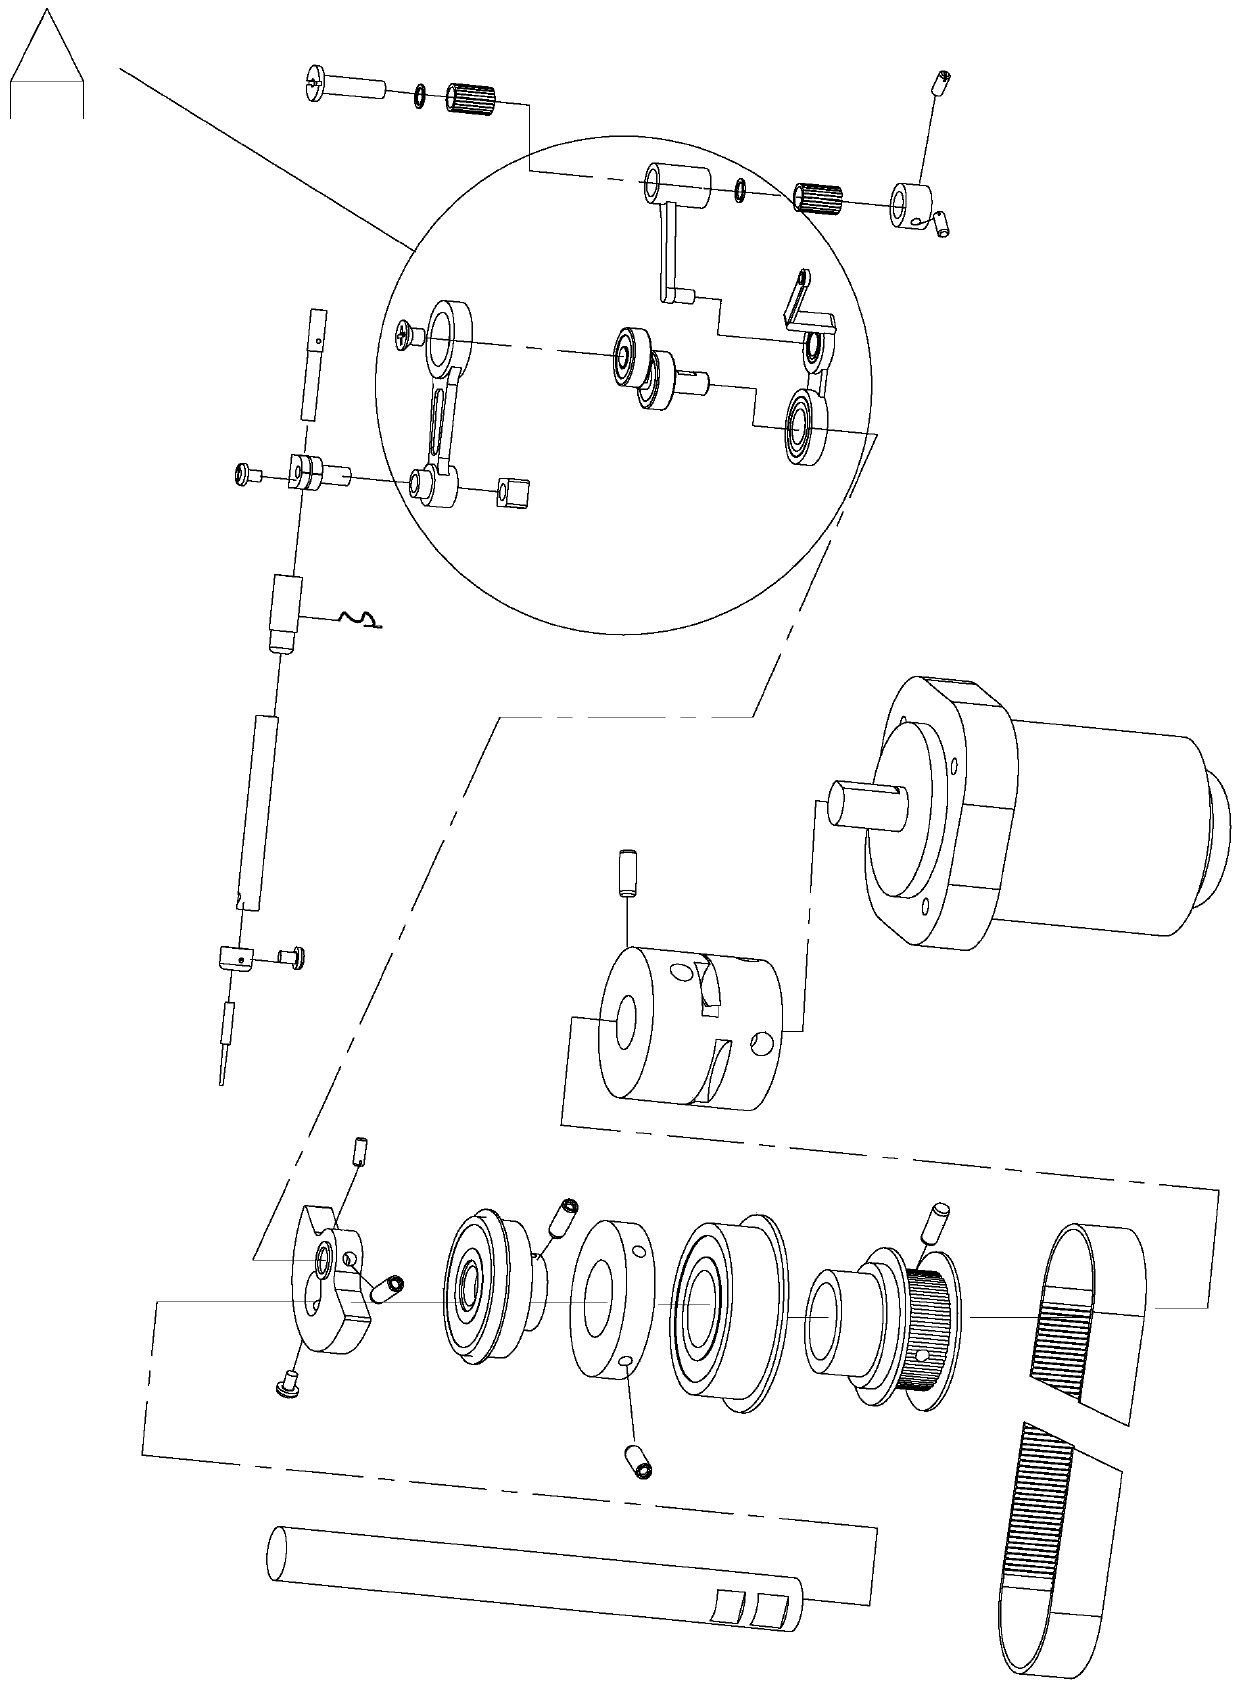 Take-up lever device, link mechanism and production process of link mechanism